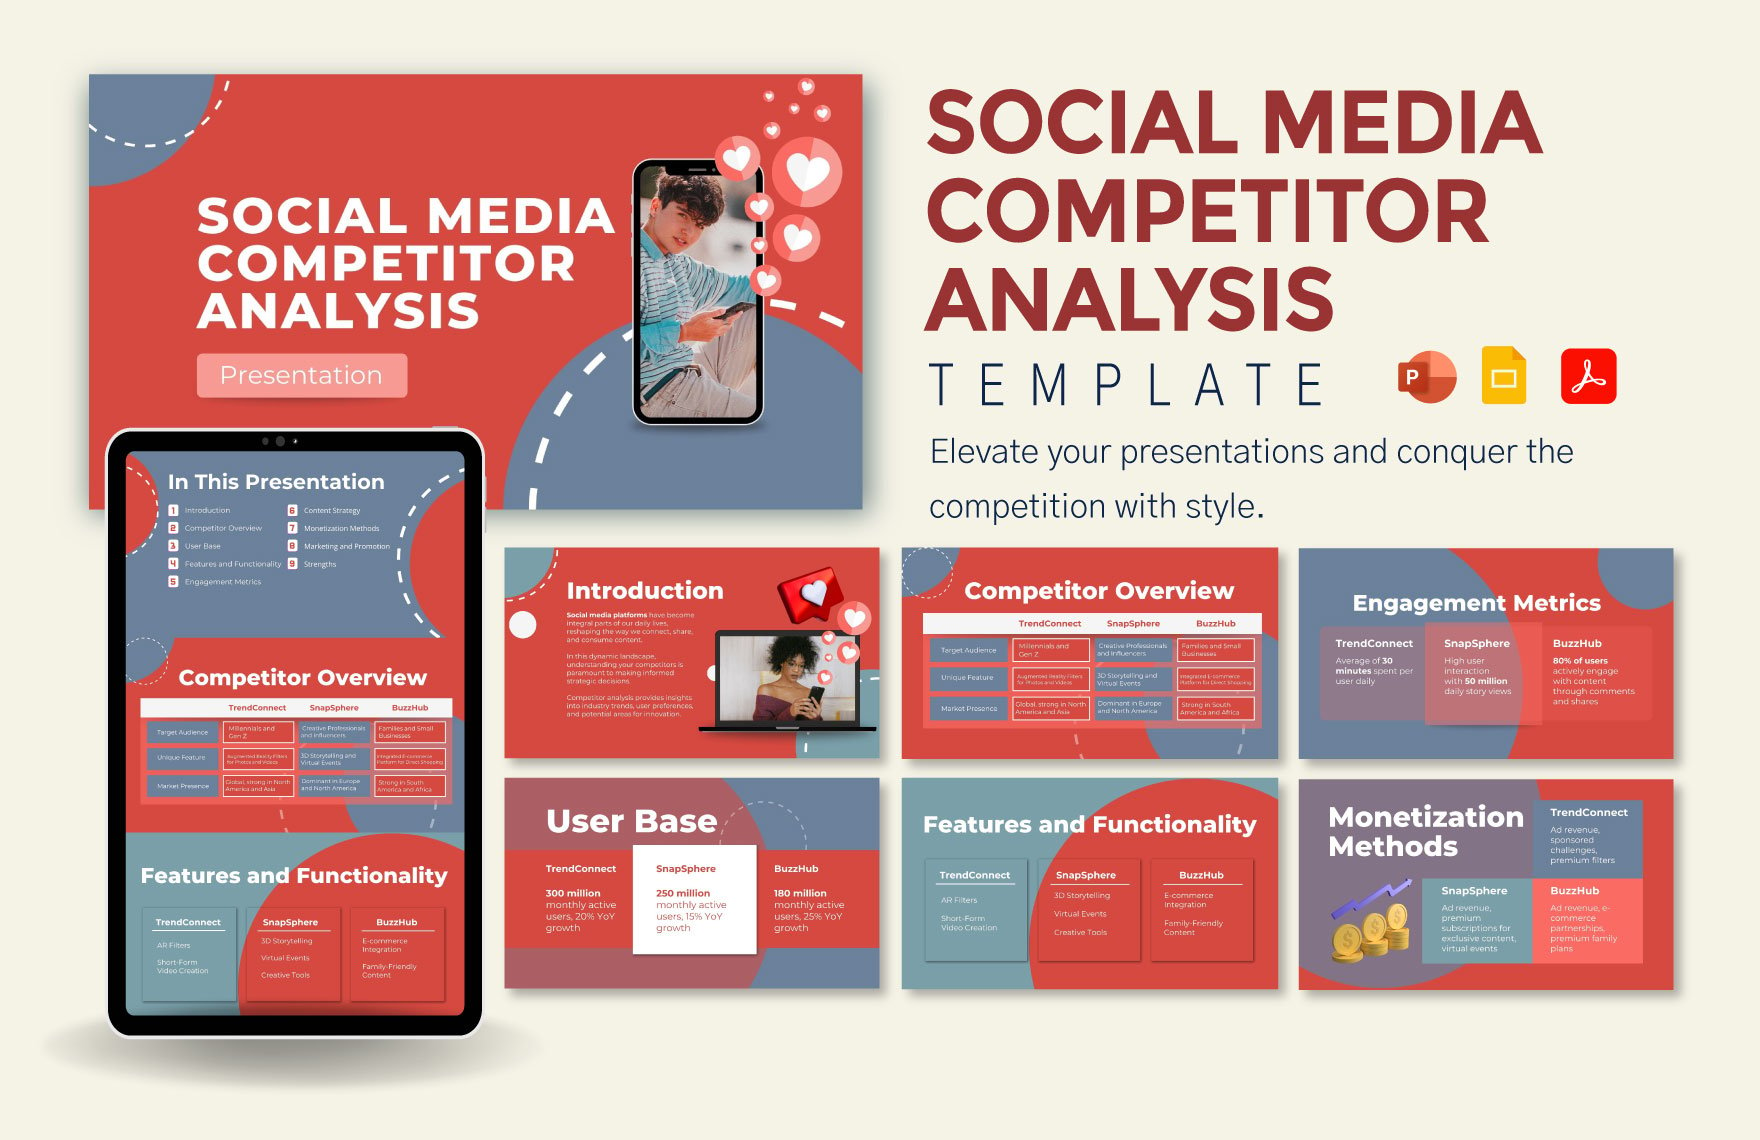 Social Media Competitor Analysis Template